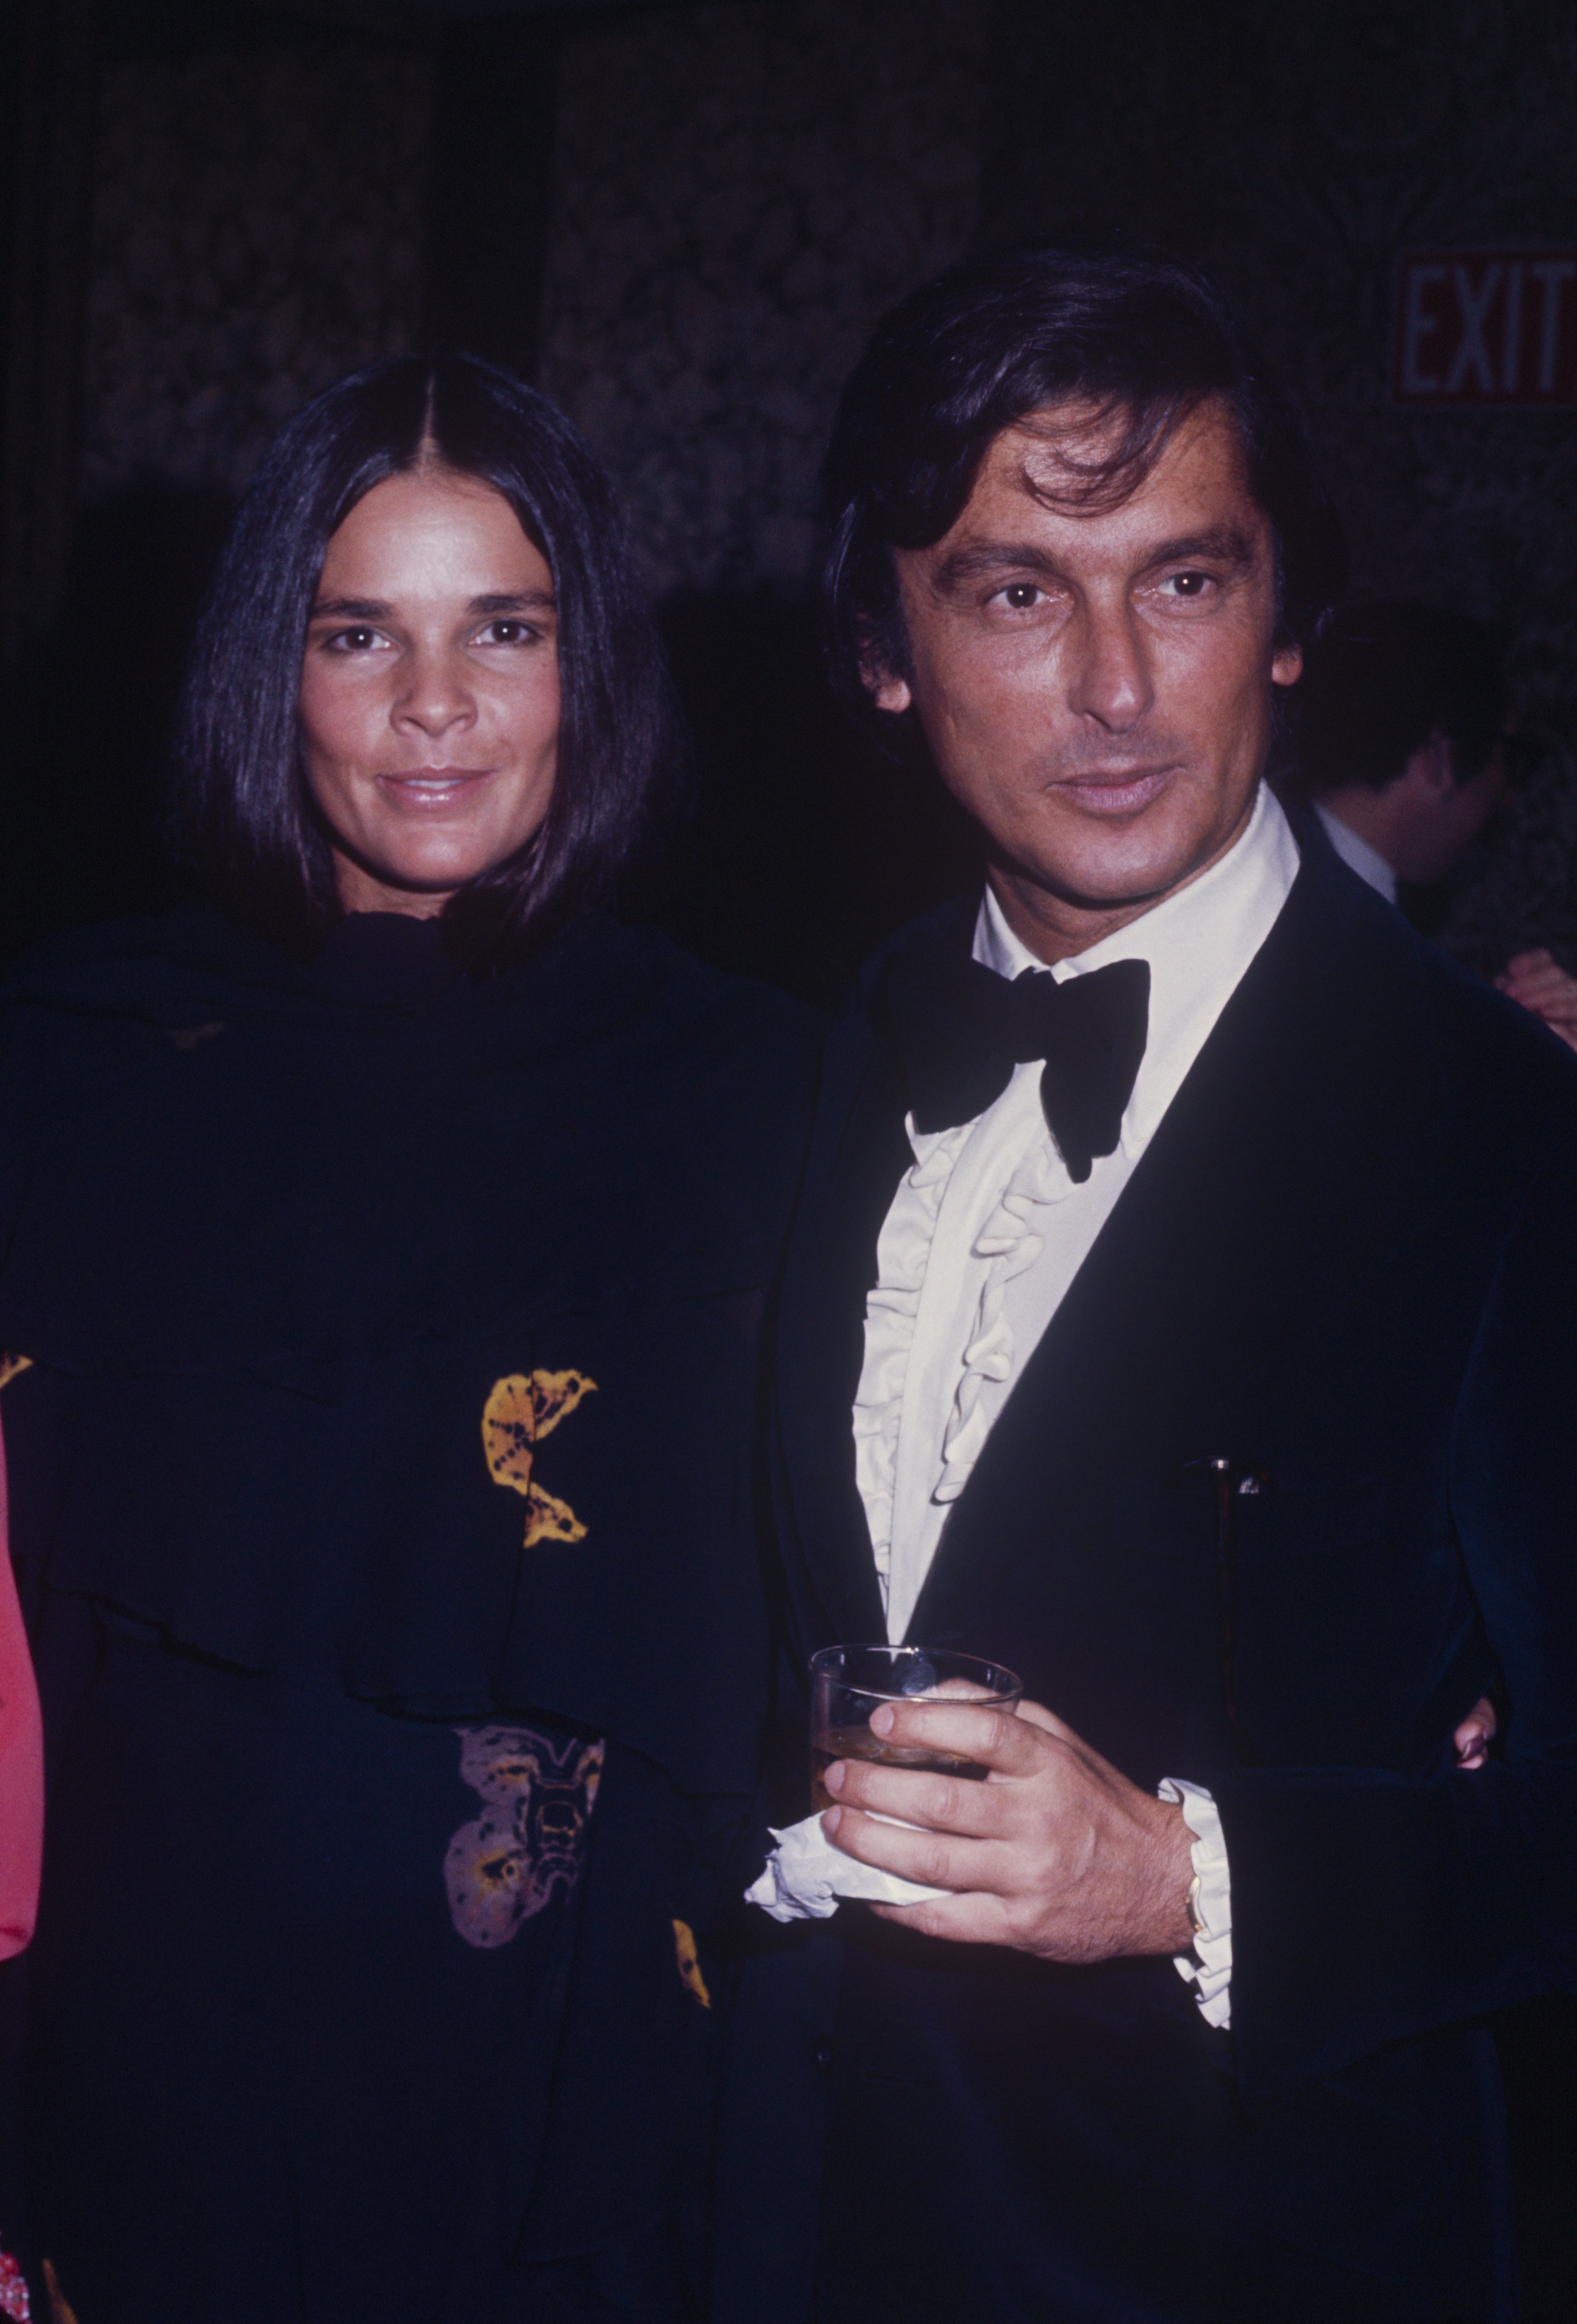 Film producer Robert Evans with his wife activist Ali McGraw during a formal event in 1970, New York. | Source: Getty Images